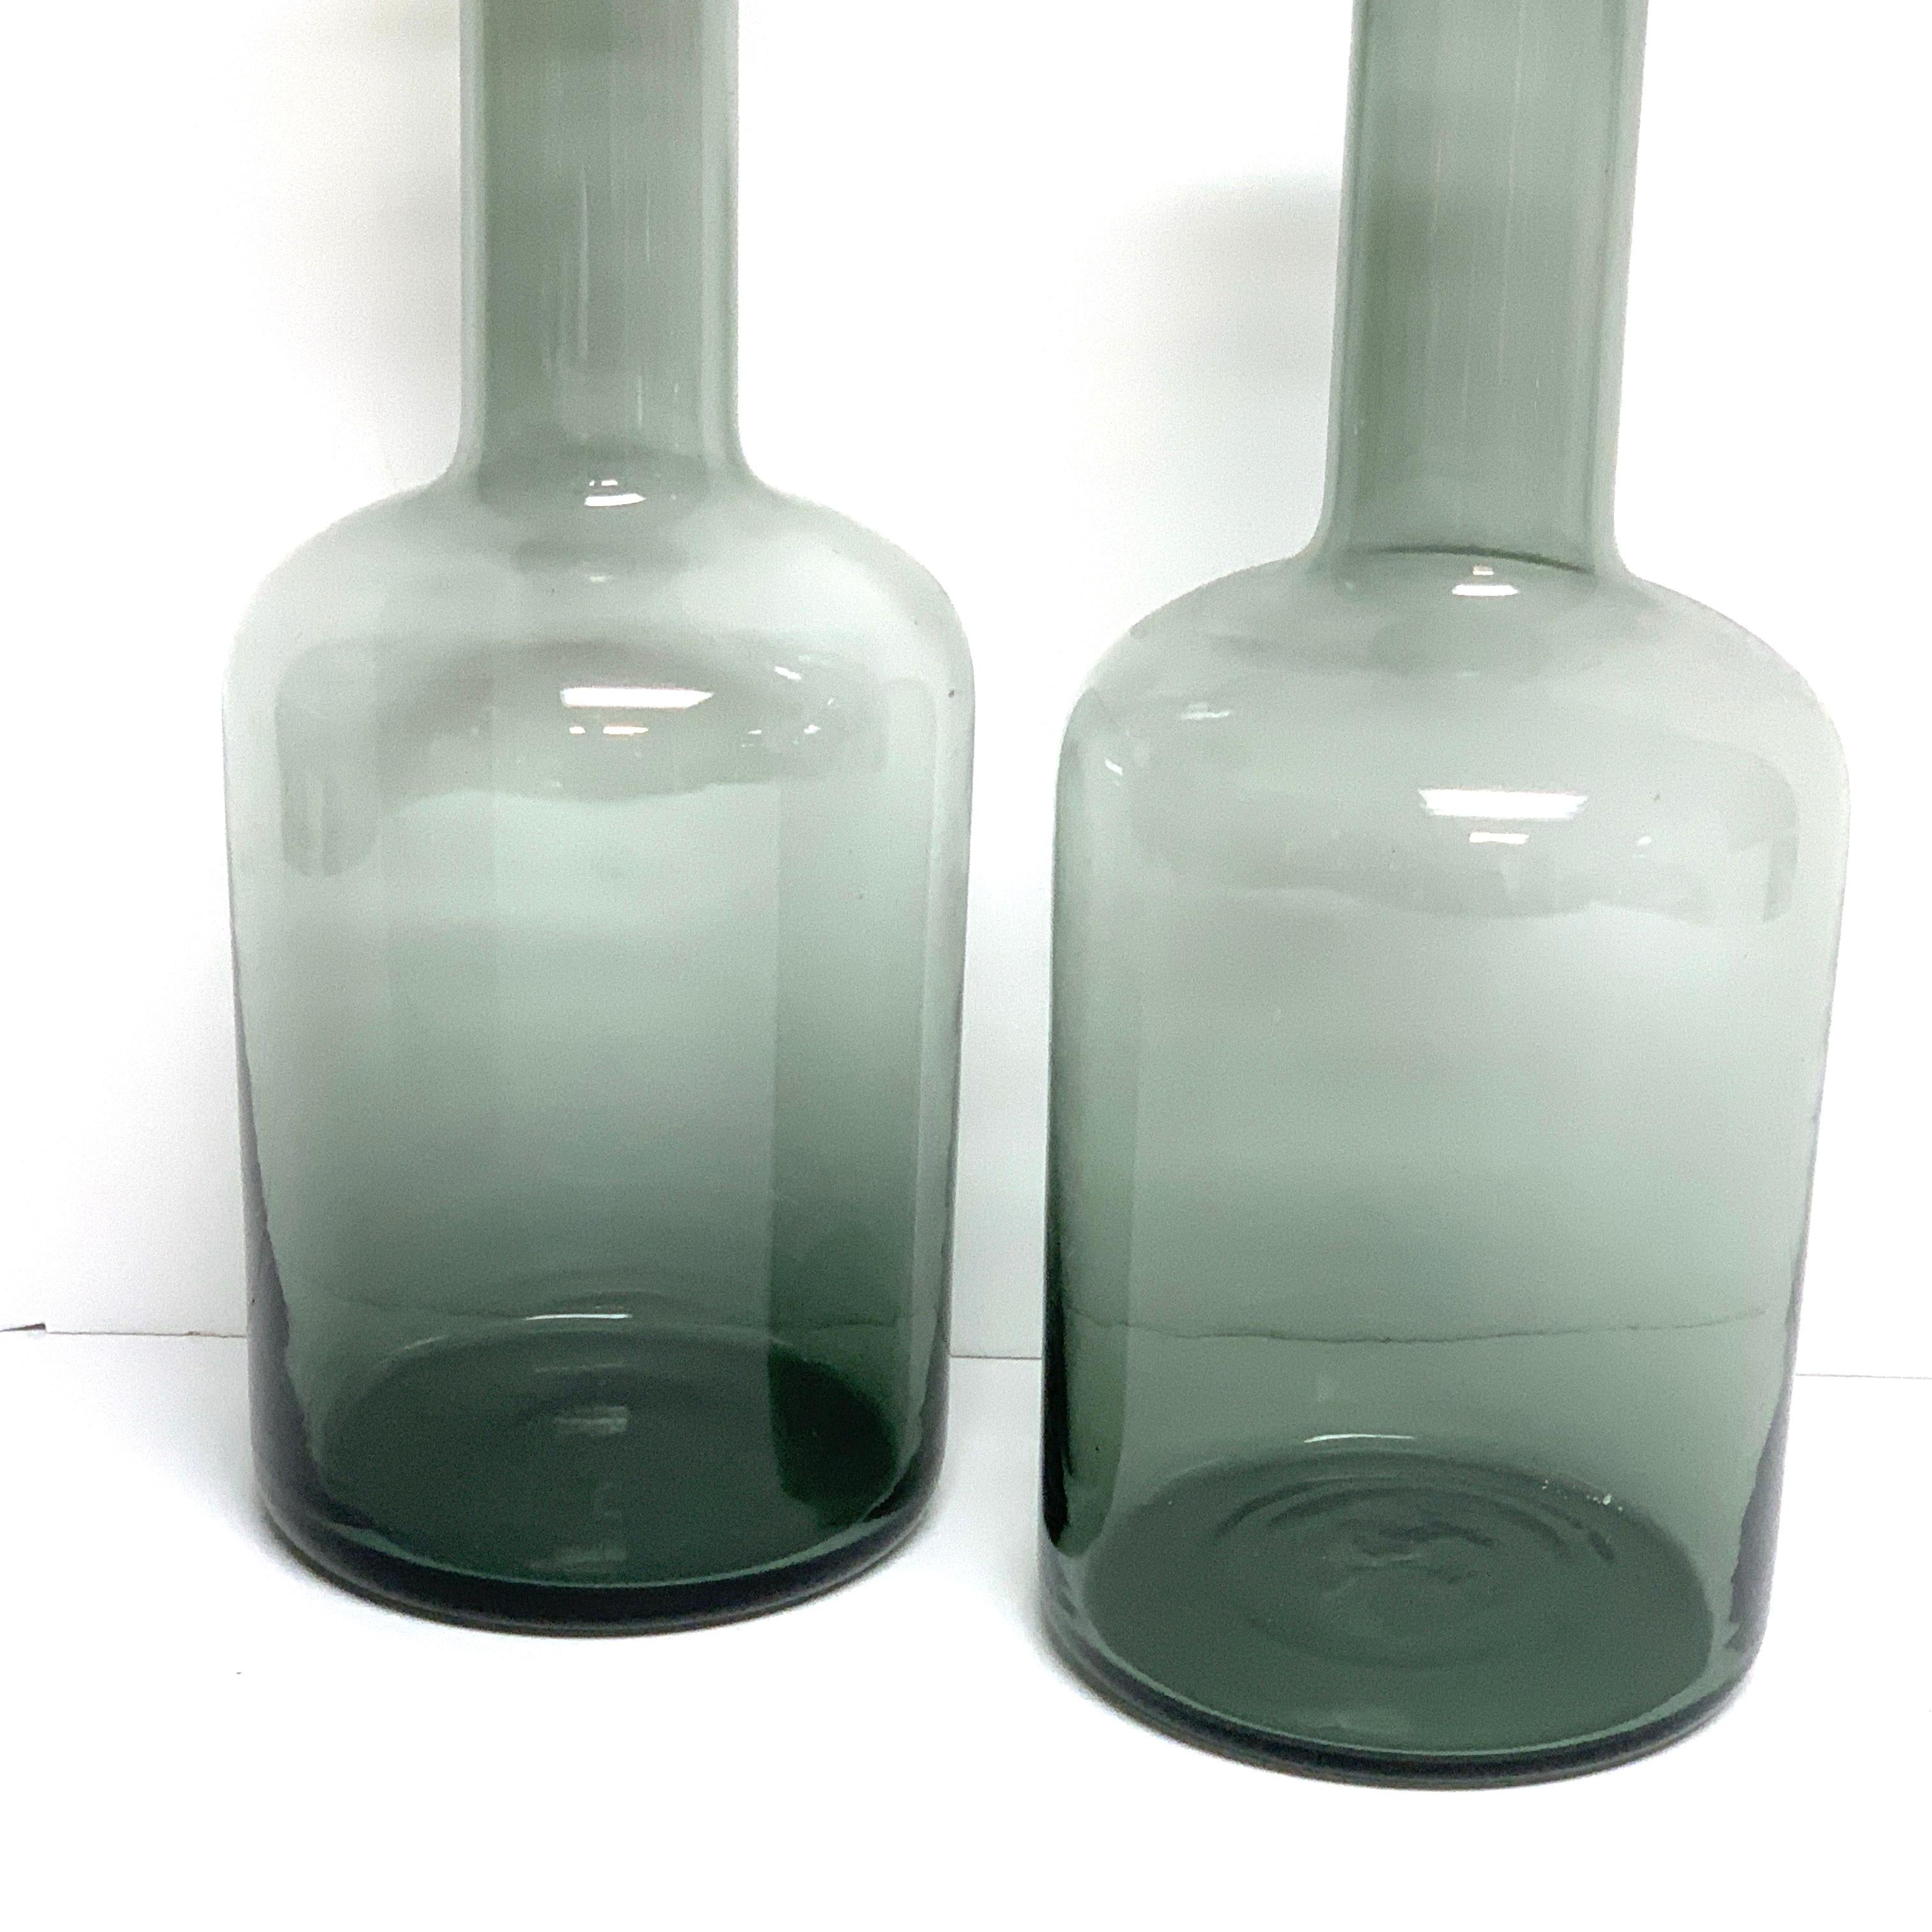 Pair of Gray Holmegaard glass bottle vases, by Otto Brauer
Each one the same size 12